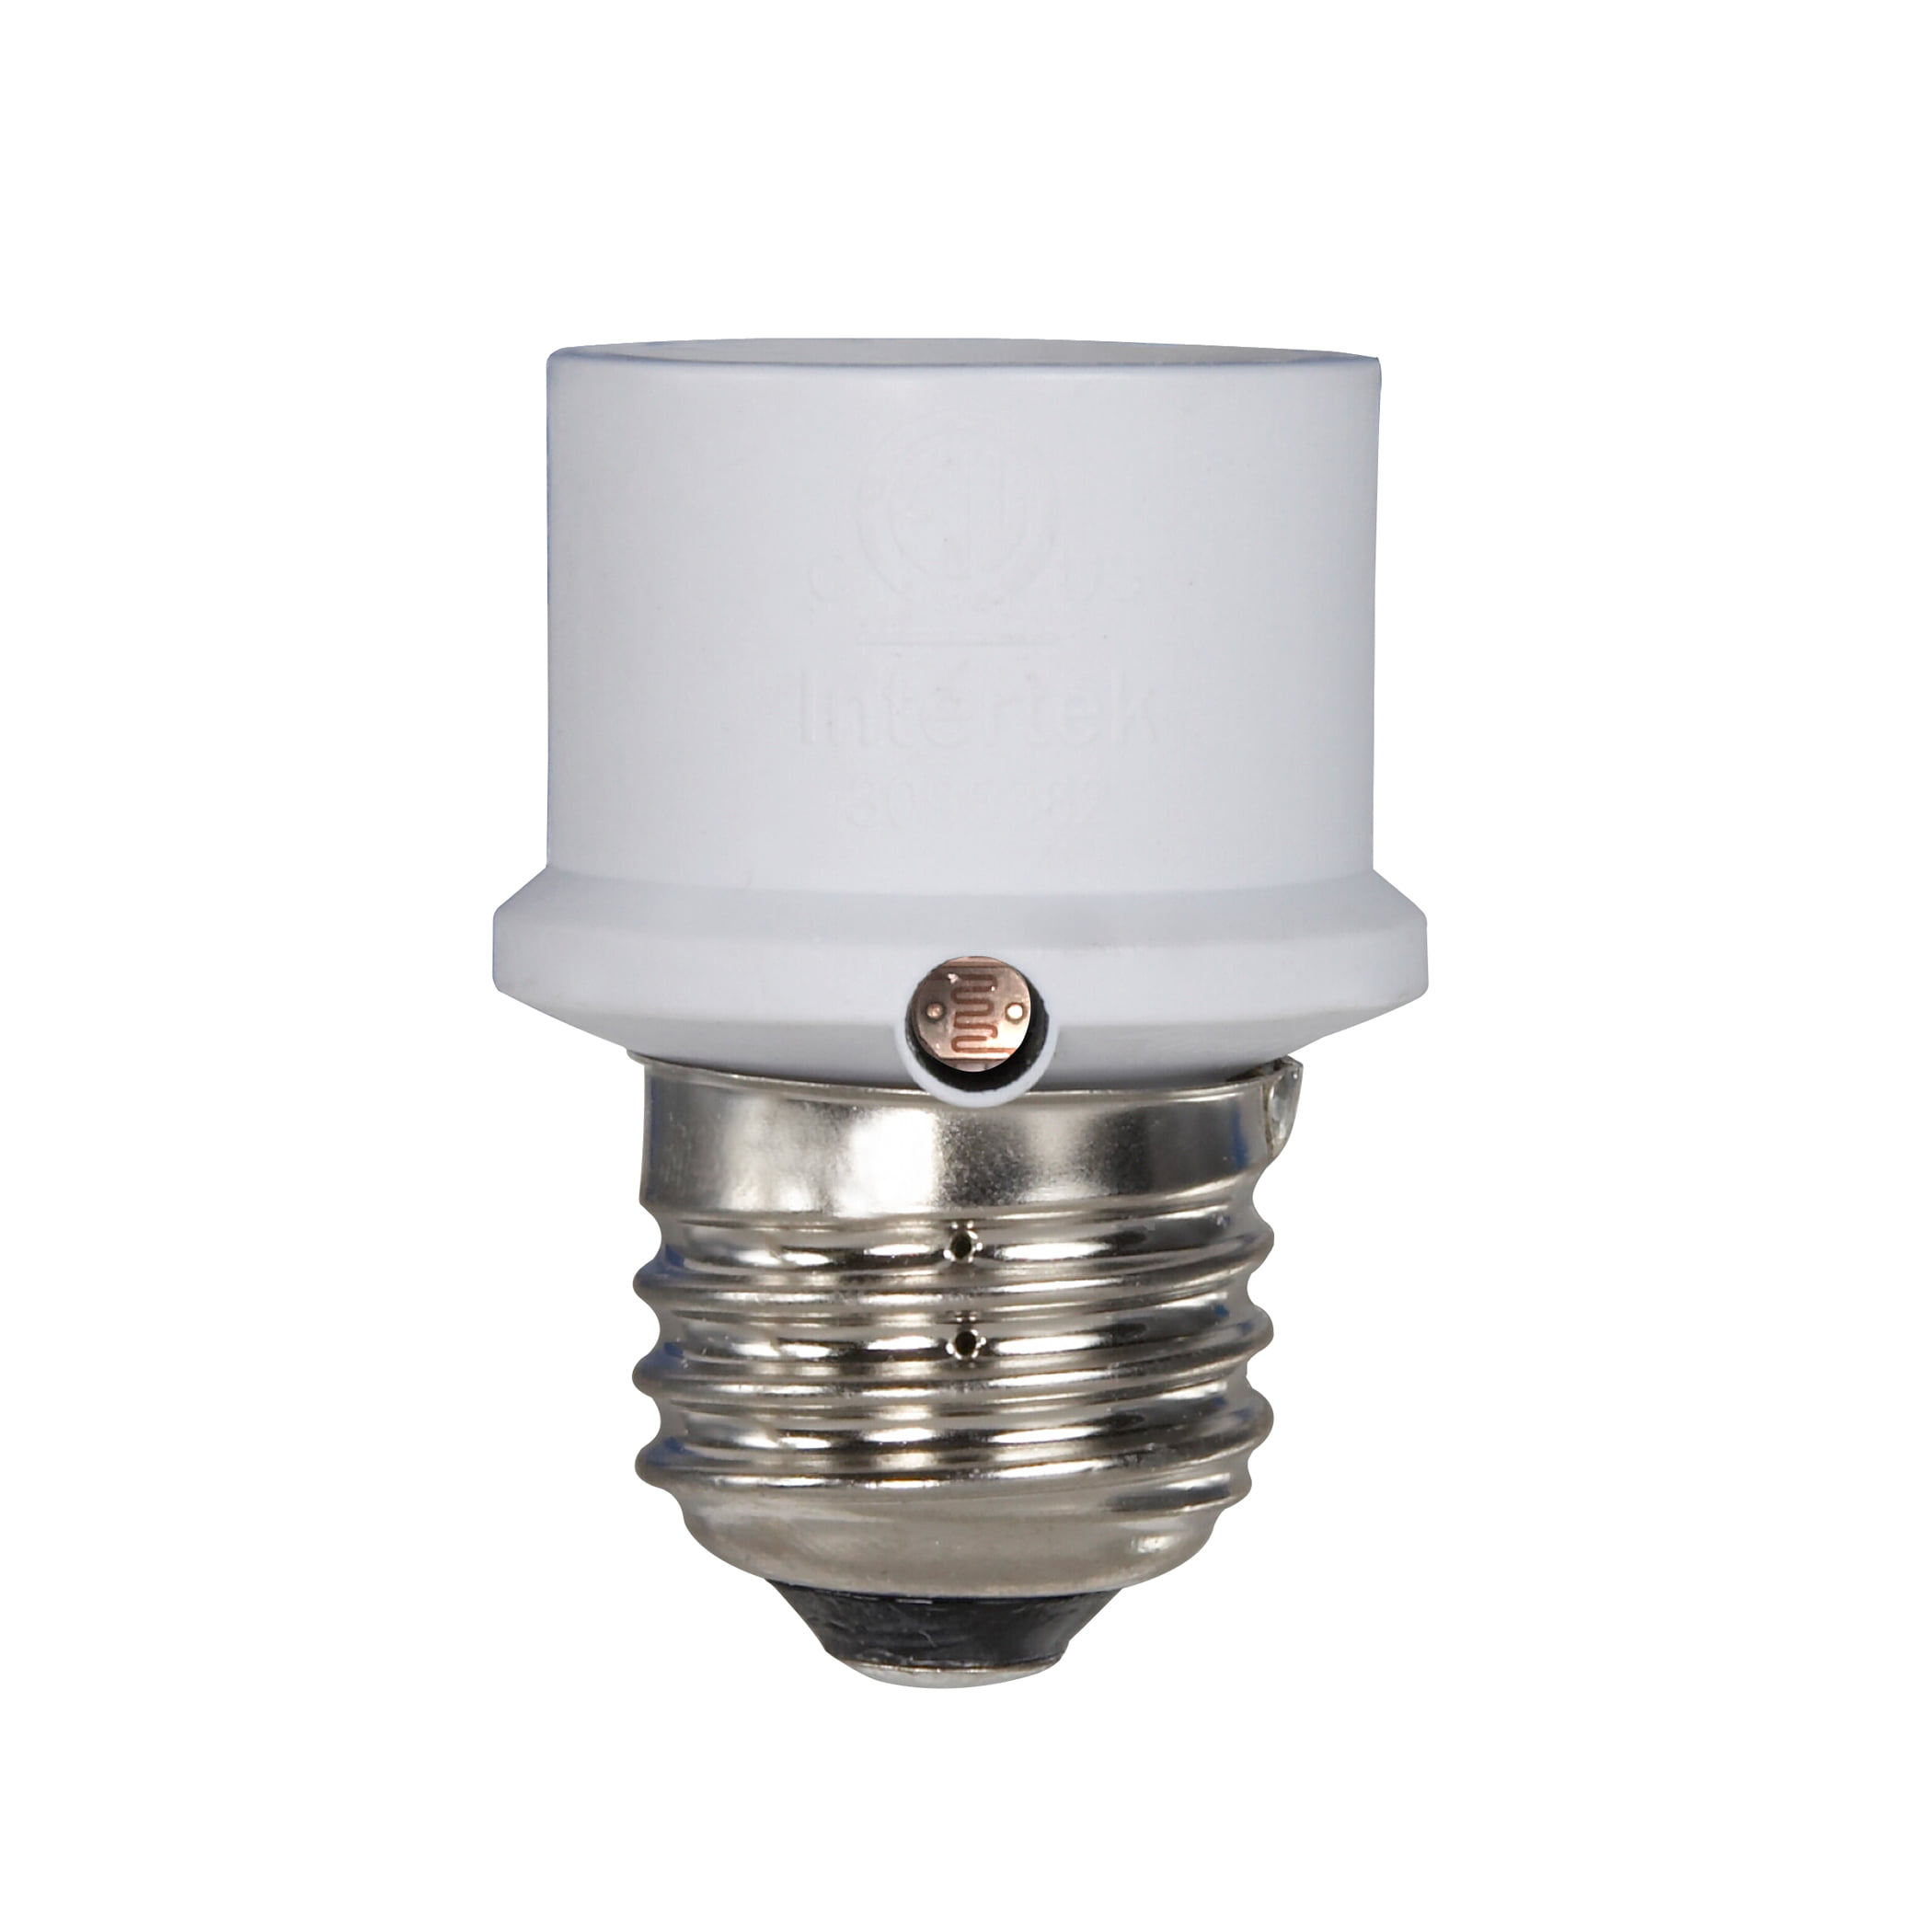 Screw In Bulb Automatic Photocell Light Socket Dusk-to-Dawn Light Control 